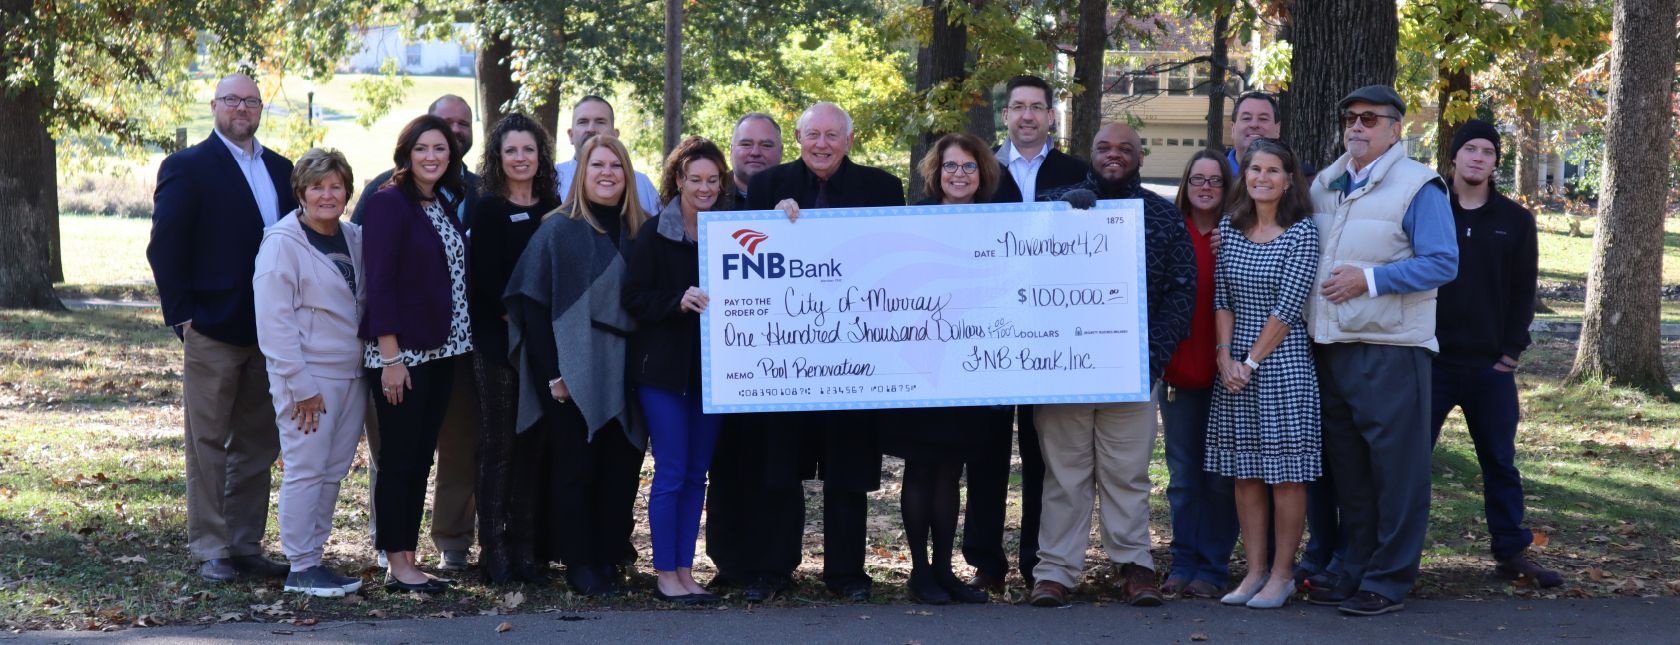 FNB Makes $100,000 Donation to Murray Parks